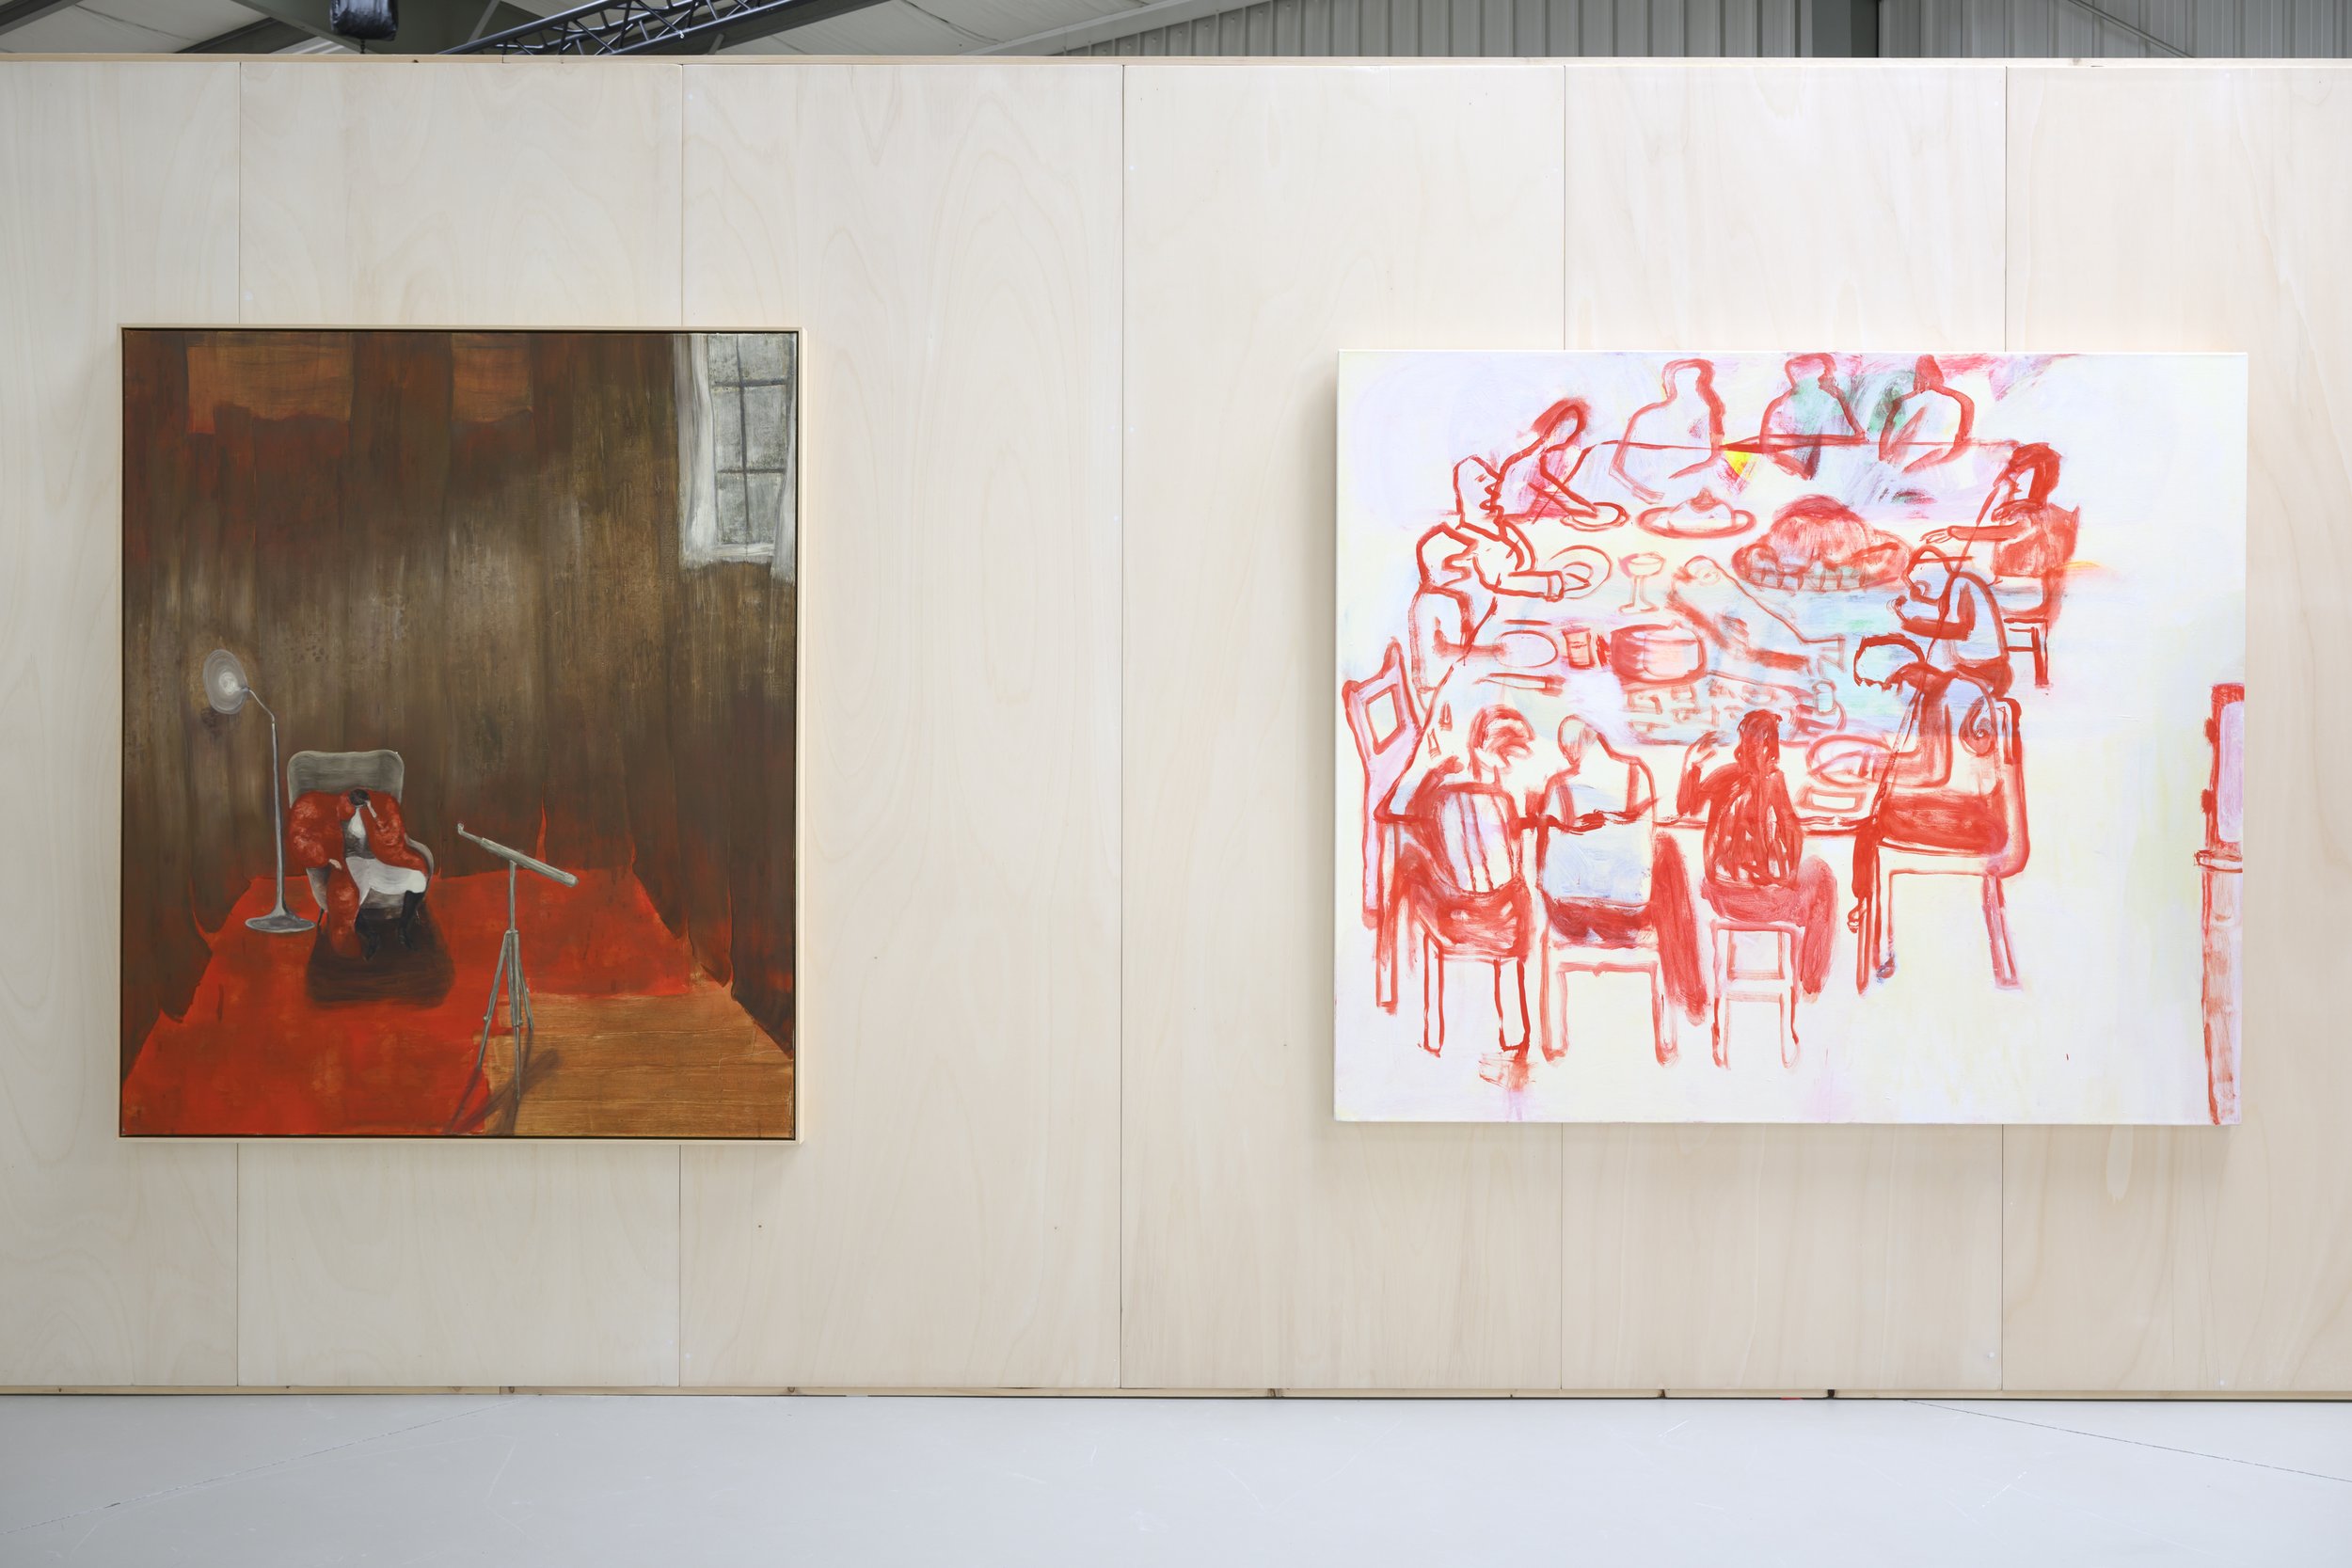  Matthias Franz, Installation view of  ‘Realm of Scope’; Katherine Bradford,  Installation view of ‘Lunch Painting’ 